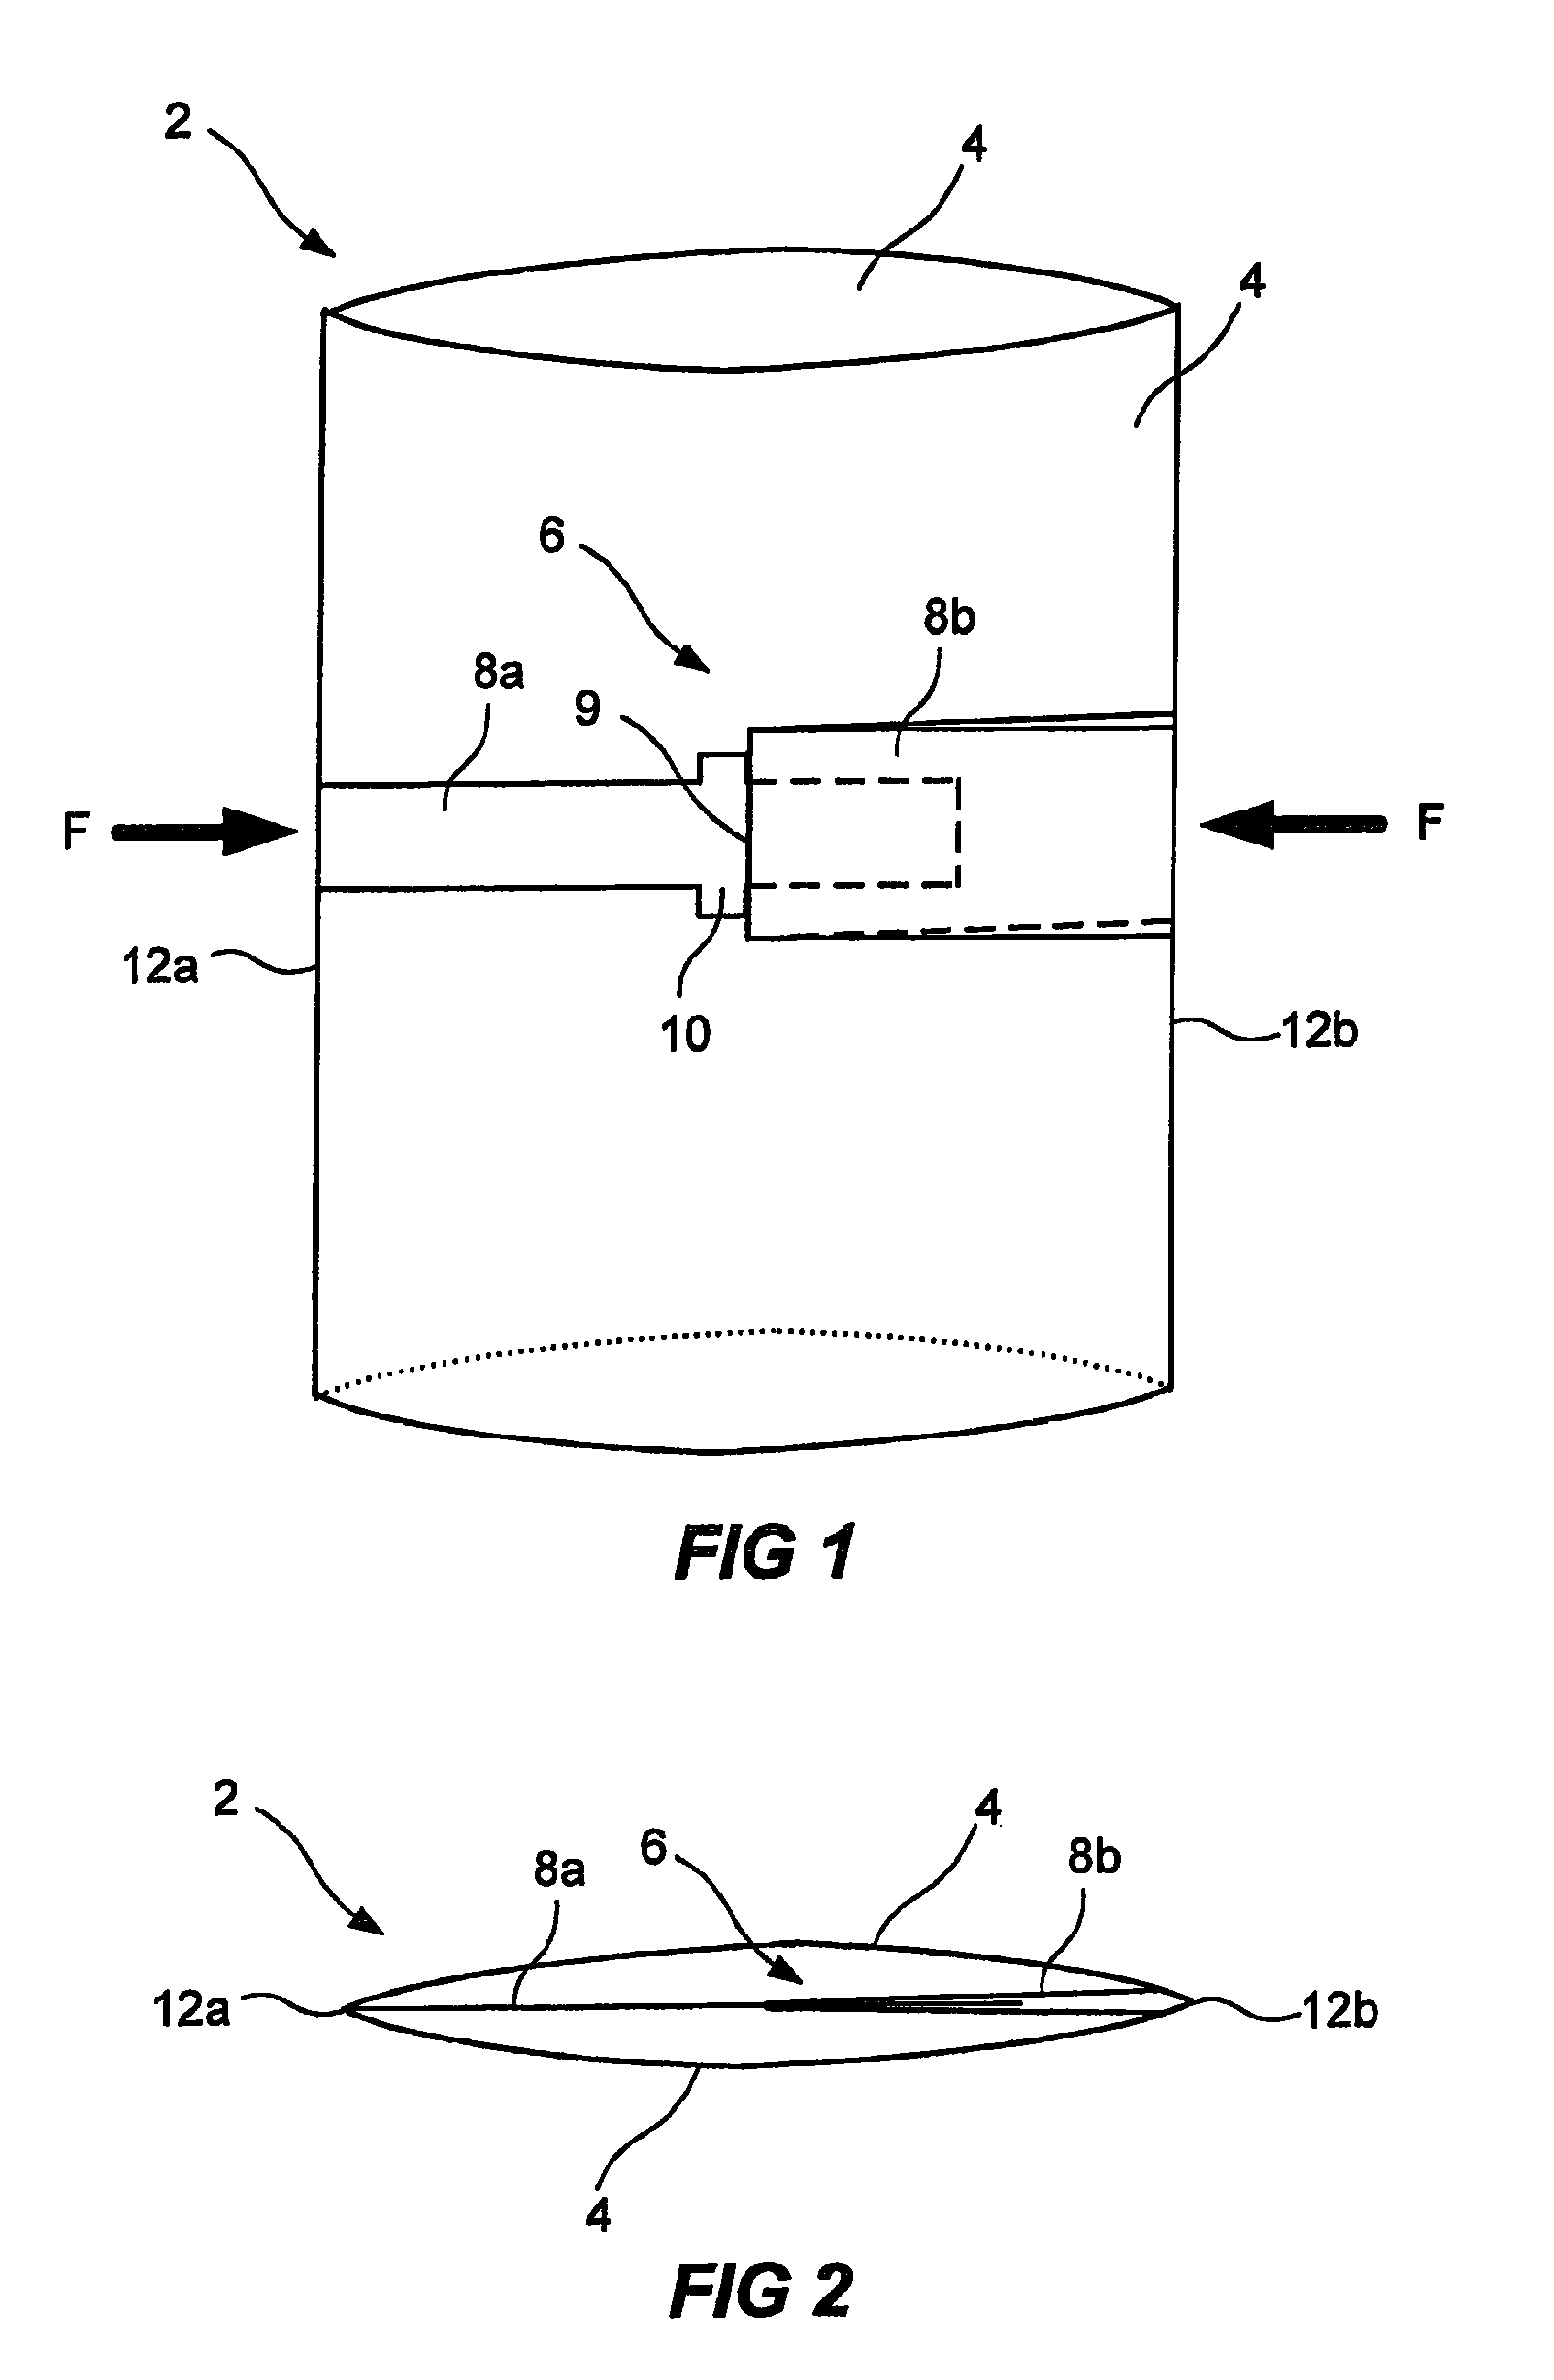 Information presenting device